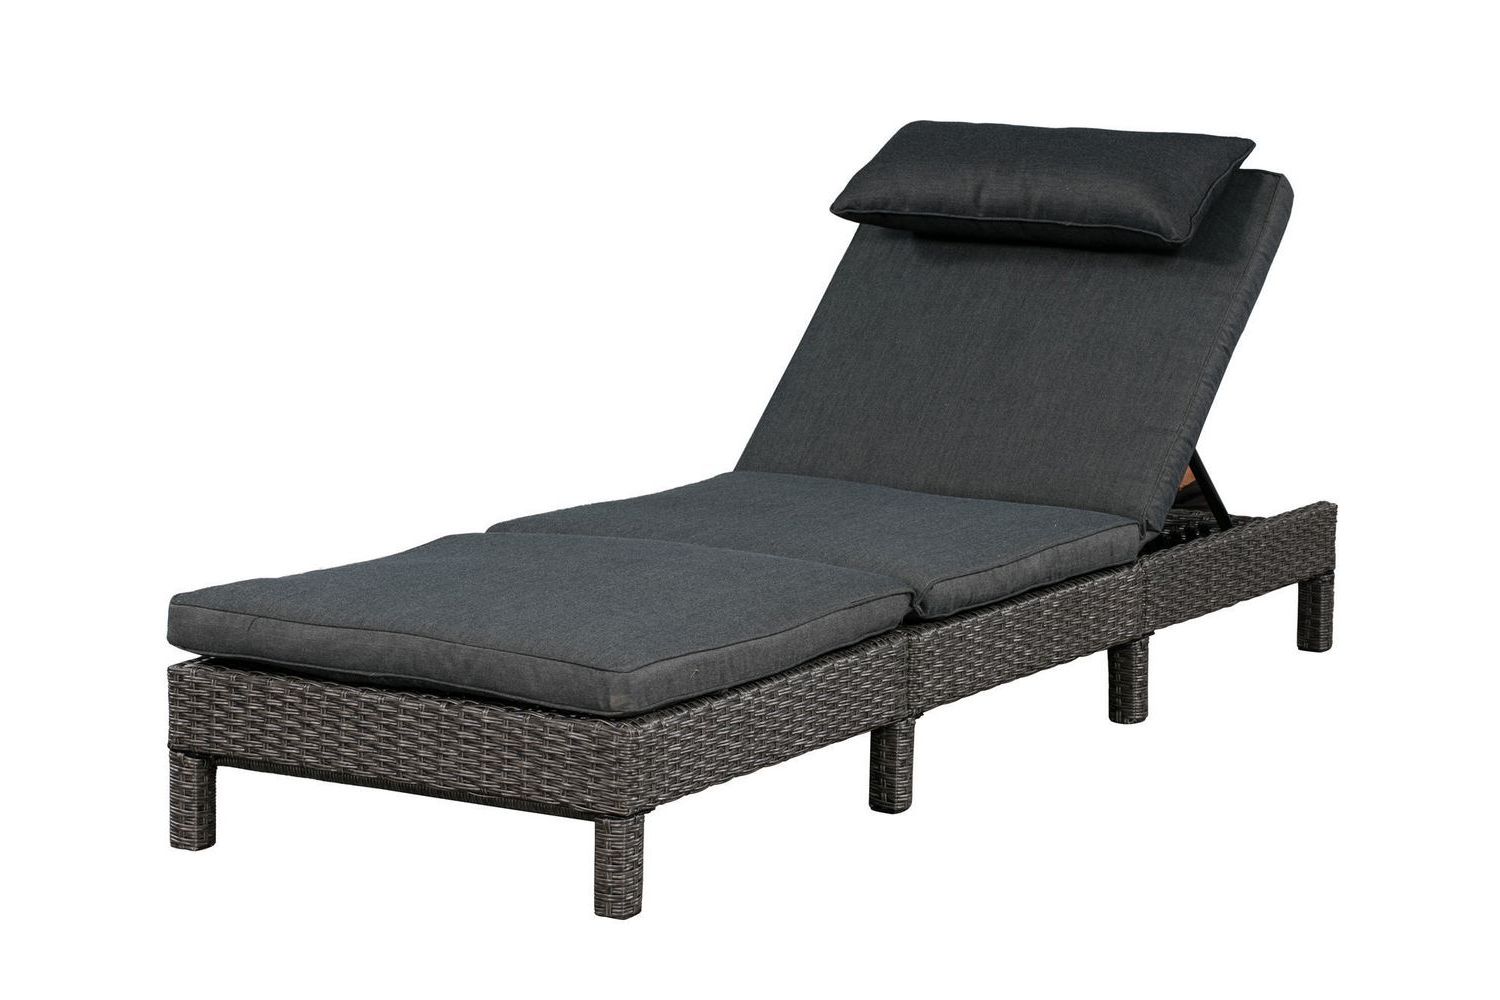 Corliving Riverside Textured Loungers Inside Most Current Patioflare Laura Wicker Lounger – Grey Wicker With Dark Grey Cushion (View 23 of 25)